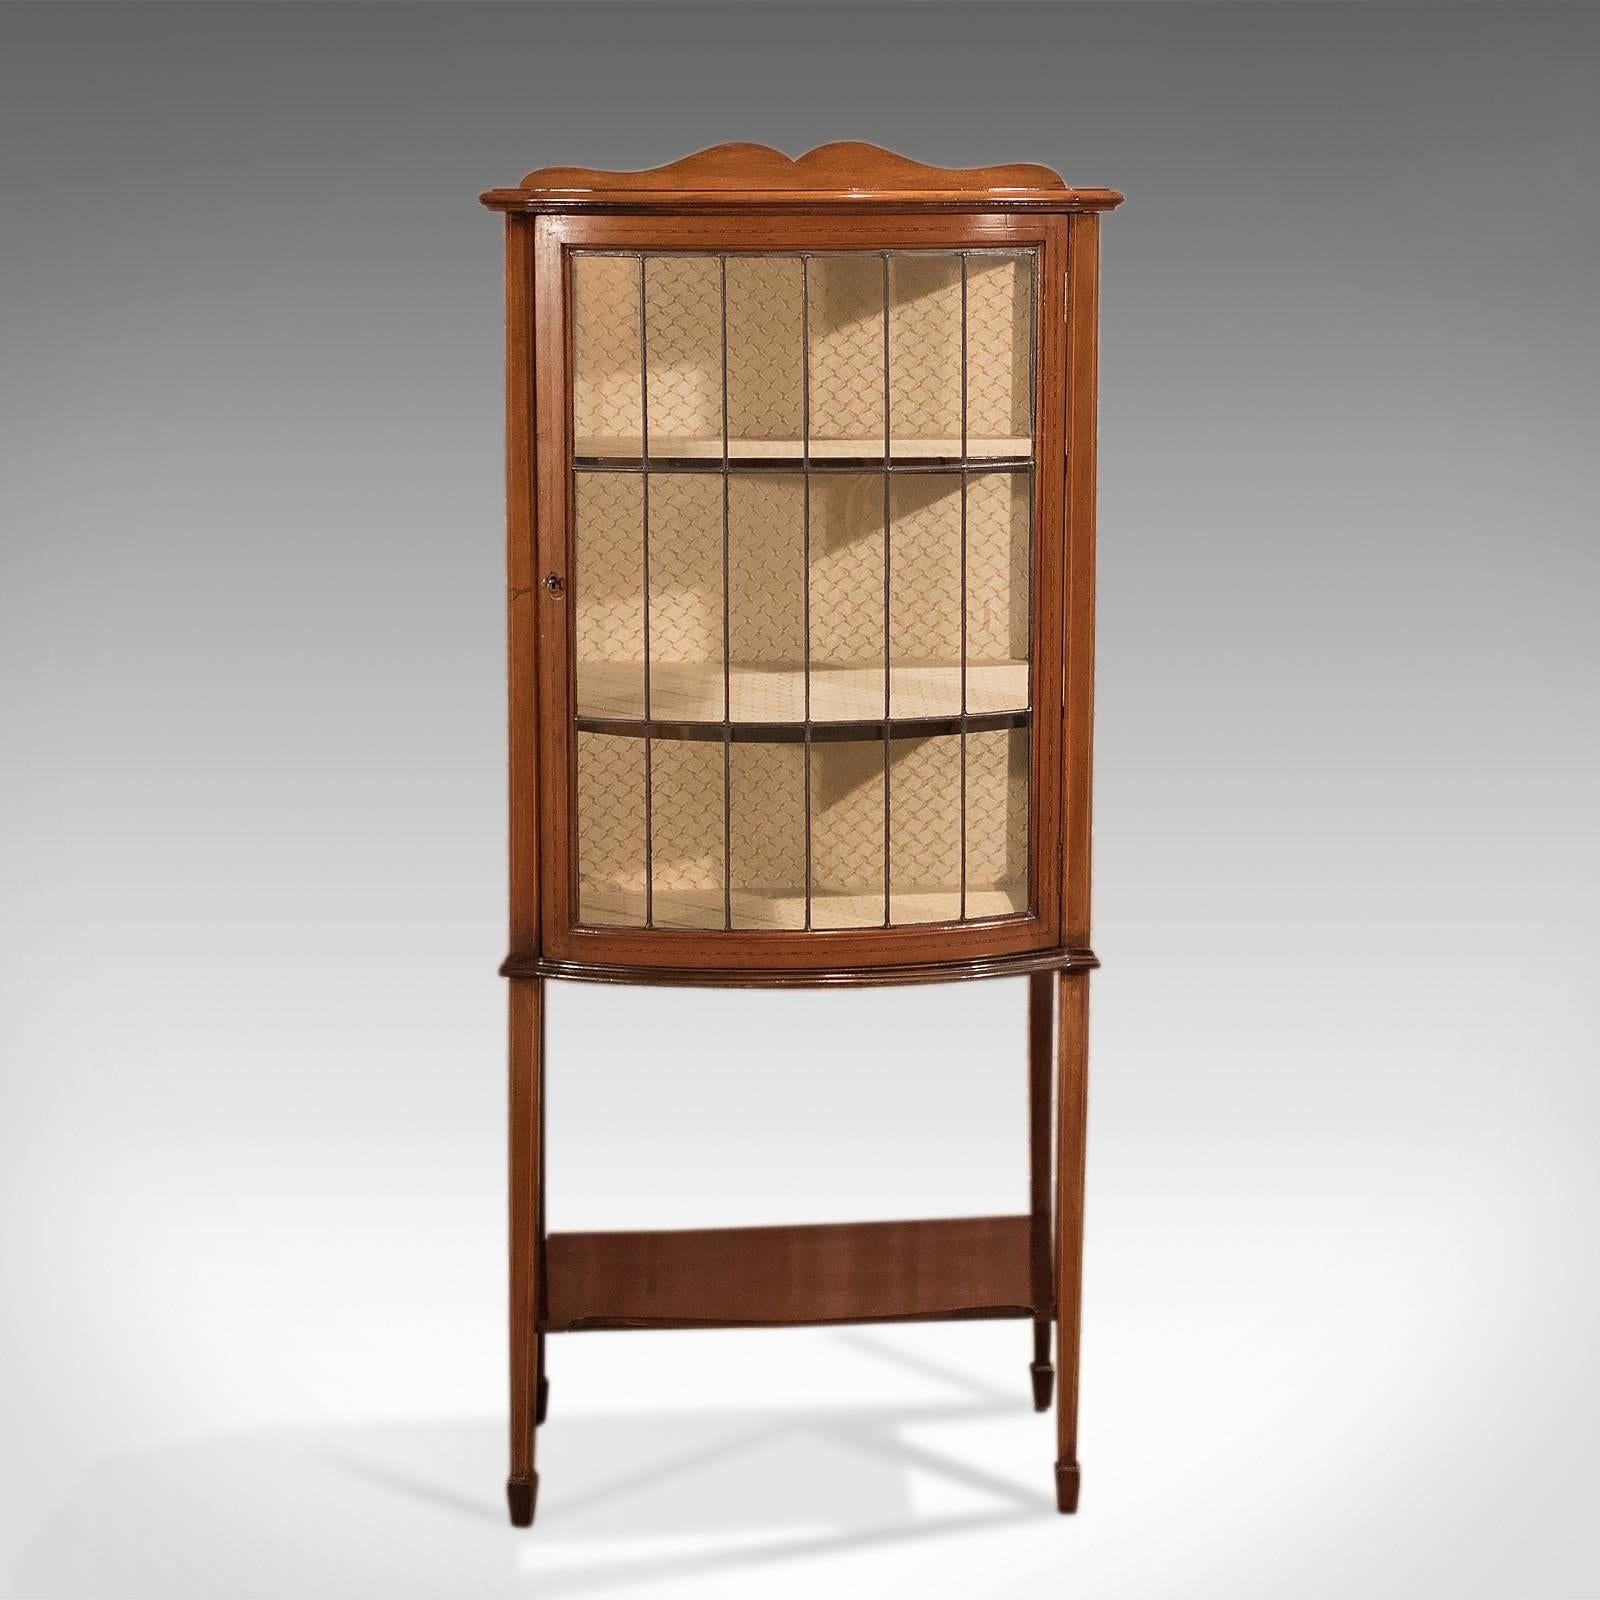 This is a superior quality, antique glazed display cabinet dating to the Edwardian period, circa 1910.

Attractive honey tones to the first class mahogany.
Desirable color and grain interest.
Inlaid with boxwood stringing to legs and